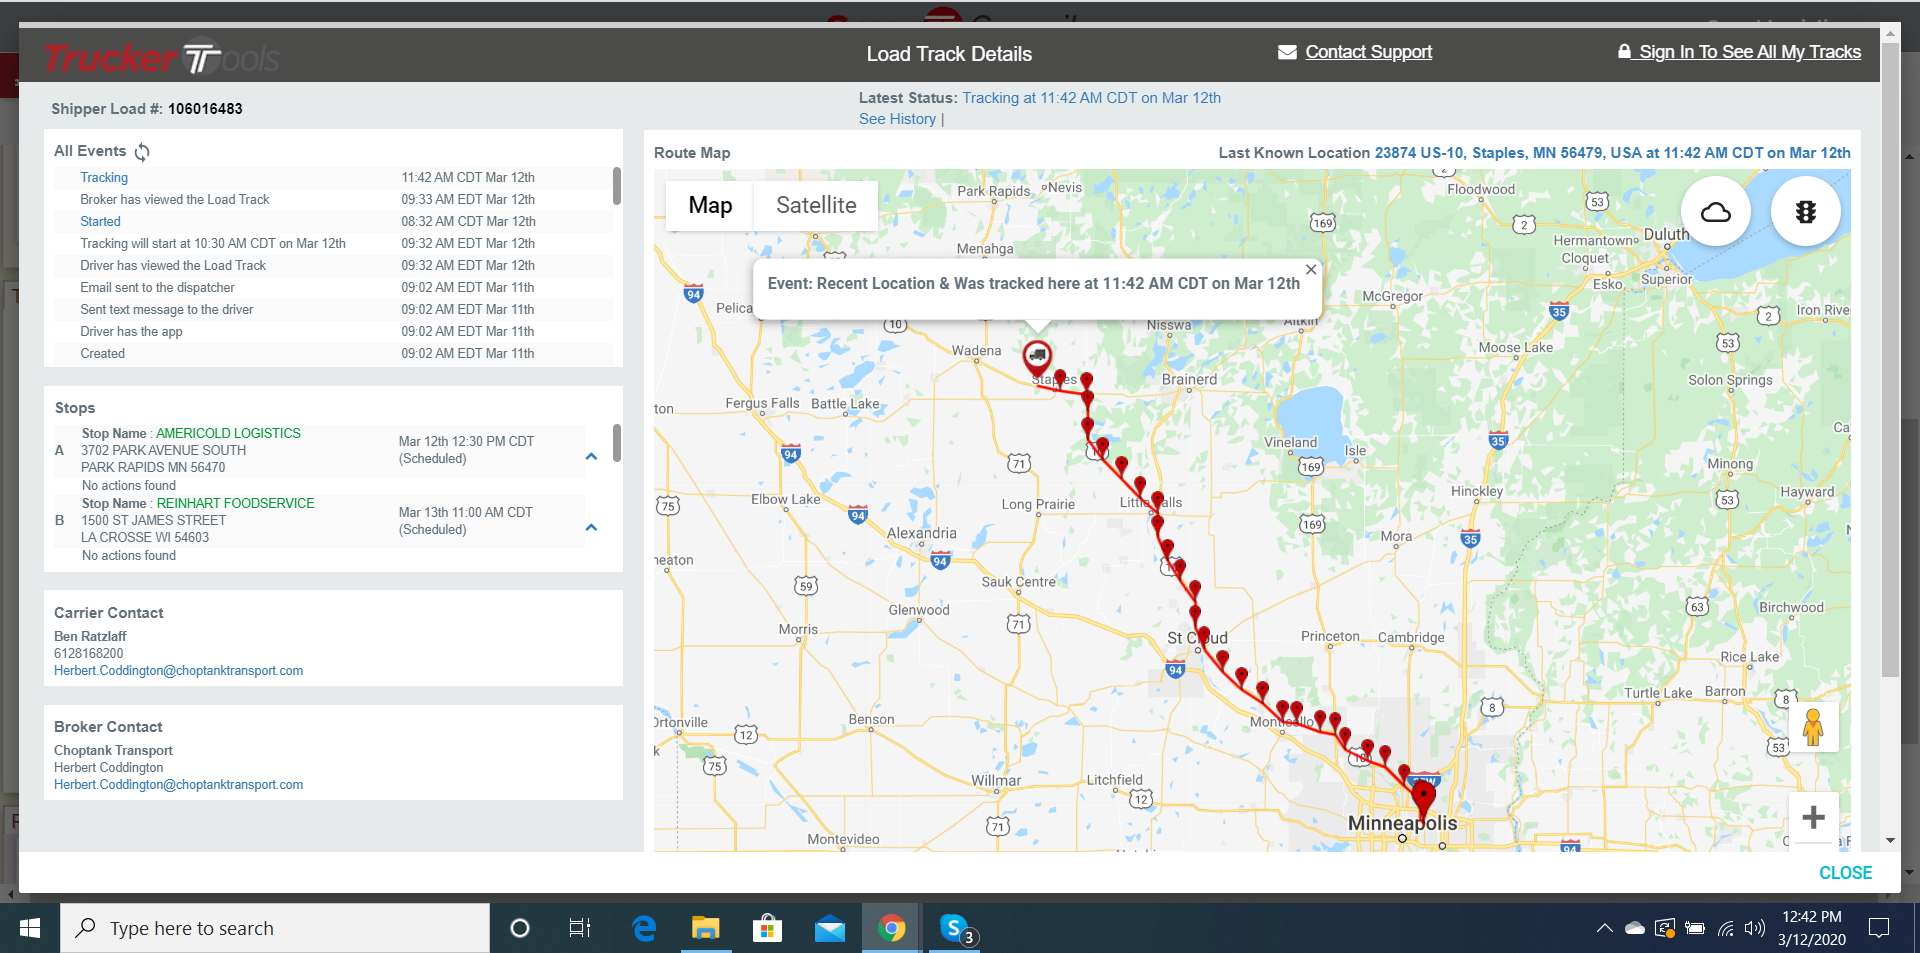 Trucker Tools app-based, GPS-powered visibility solution provides truckload shipment in-transit updates as frequently as every 5 minutes, with an updated visual progress display